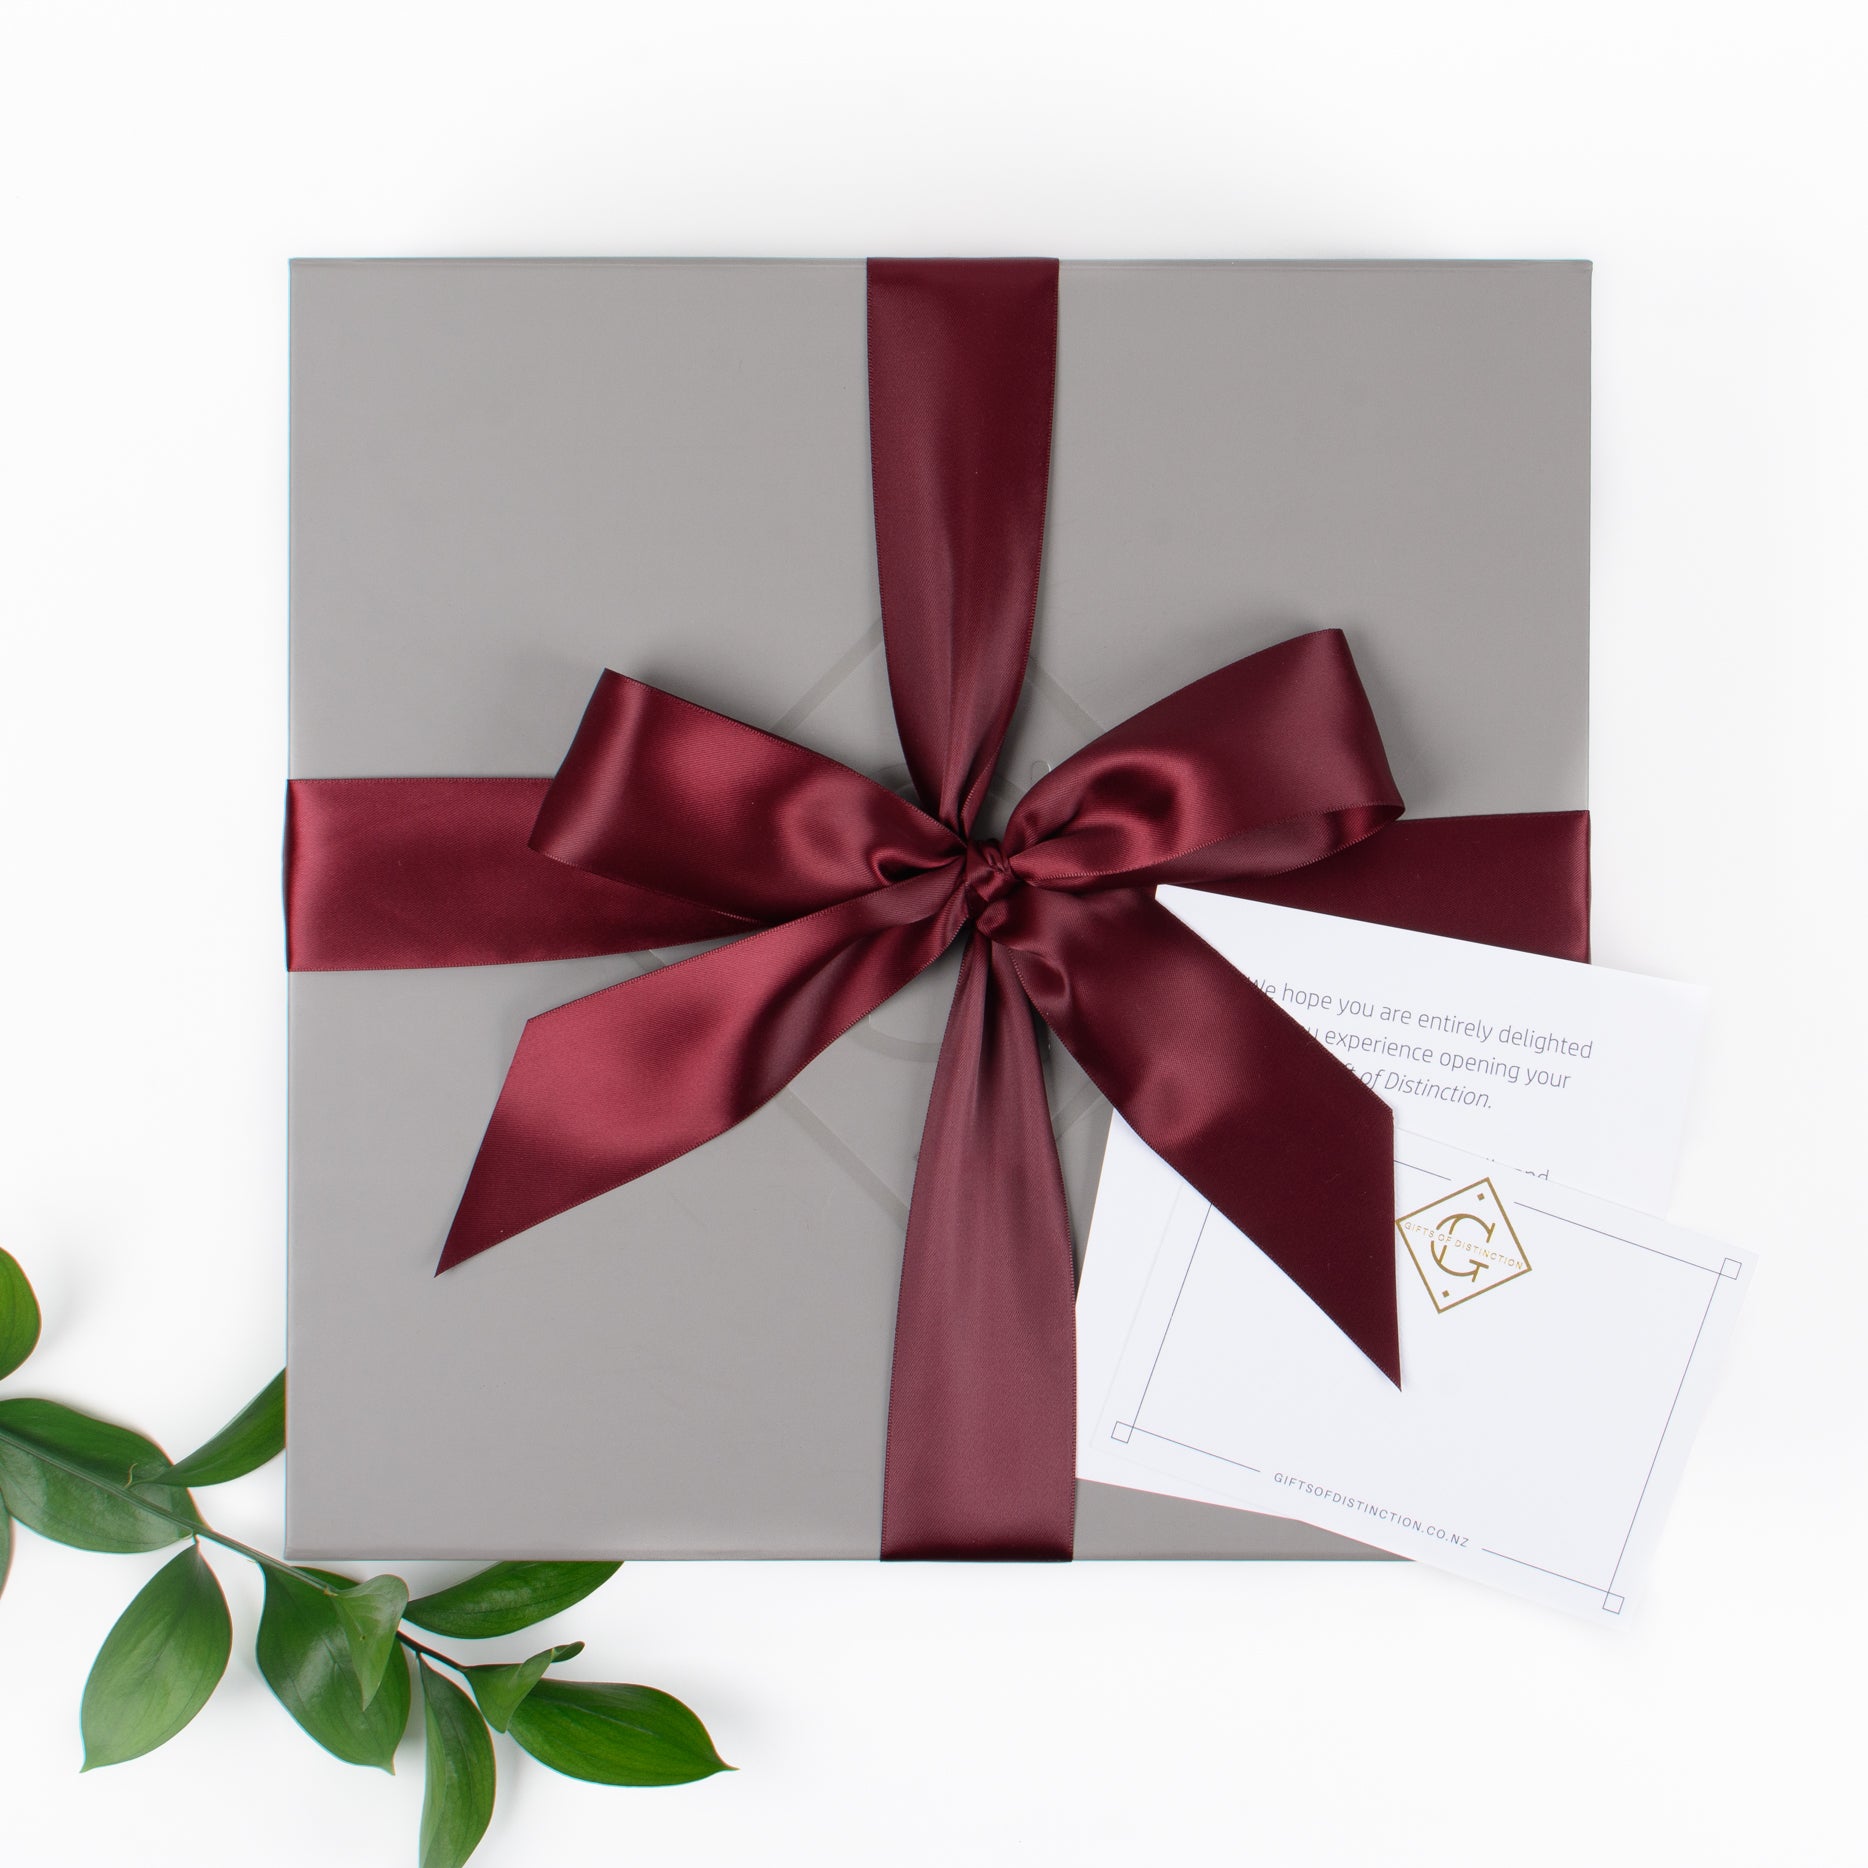 Spoil Her - Gift Boxes NZ - Gifts of Distinction